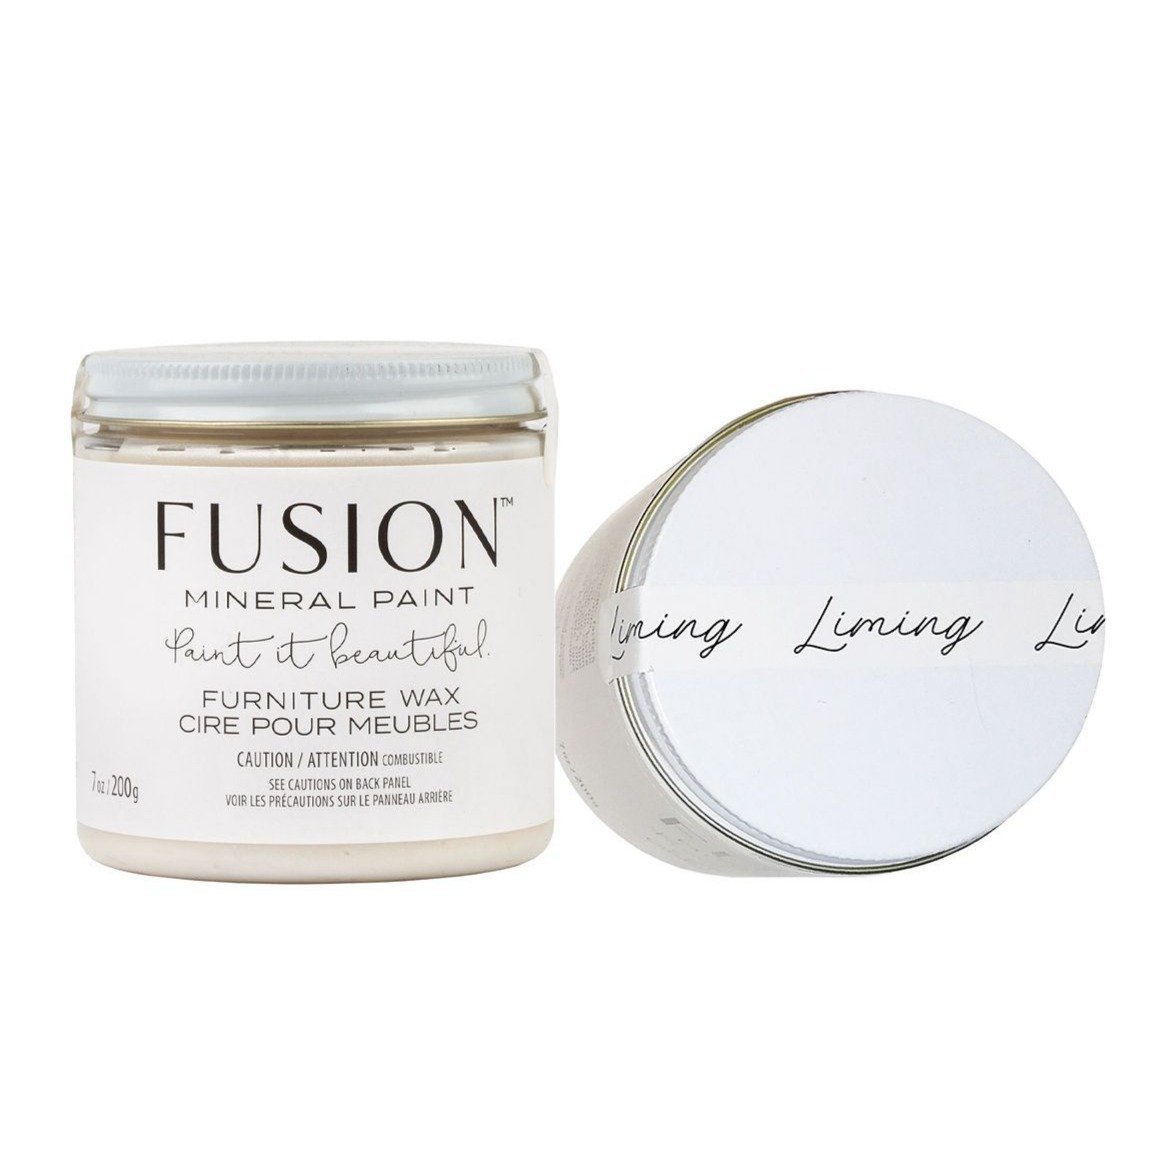 LIMING FURNITURE WAX 50g - Fusion Mineral Paint